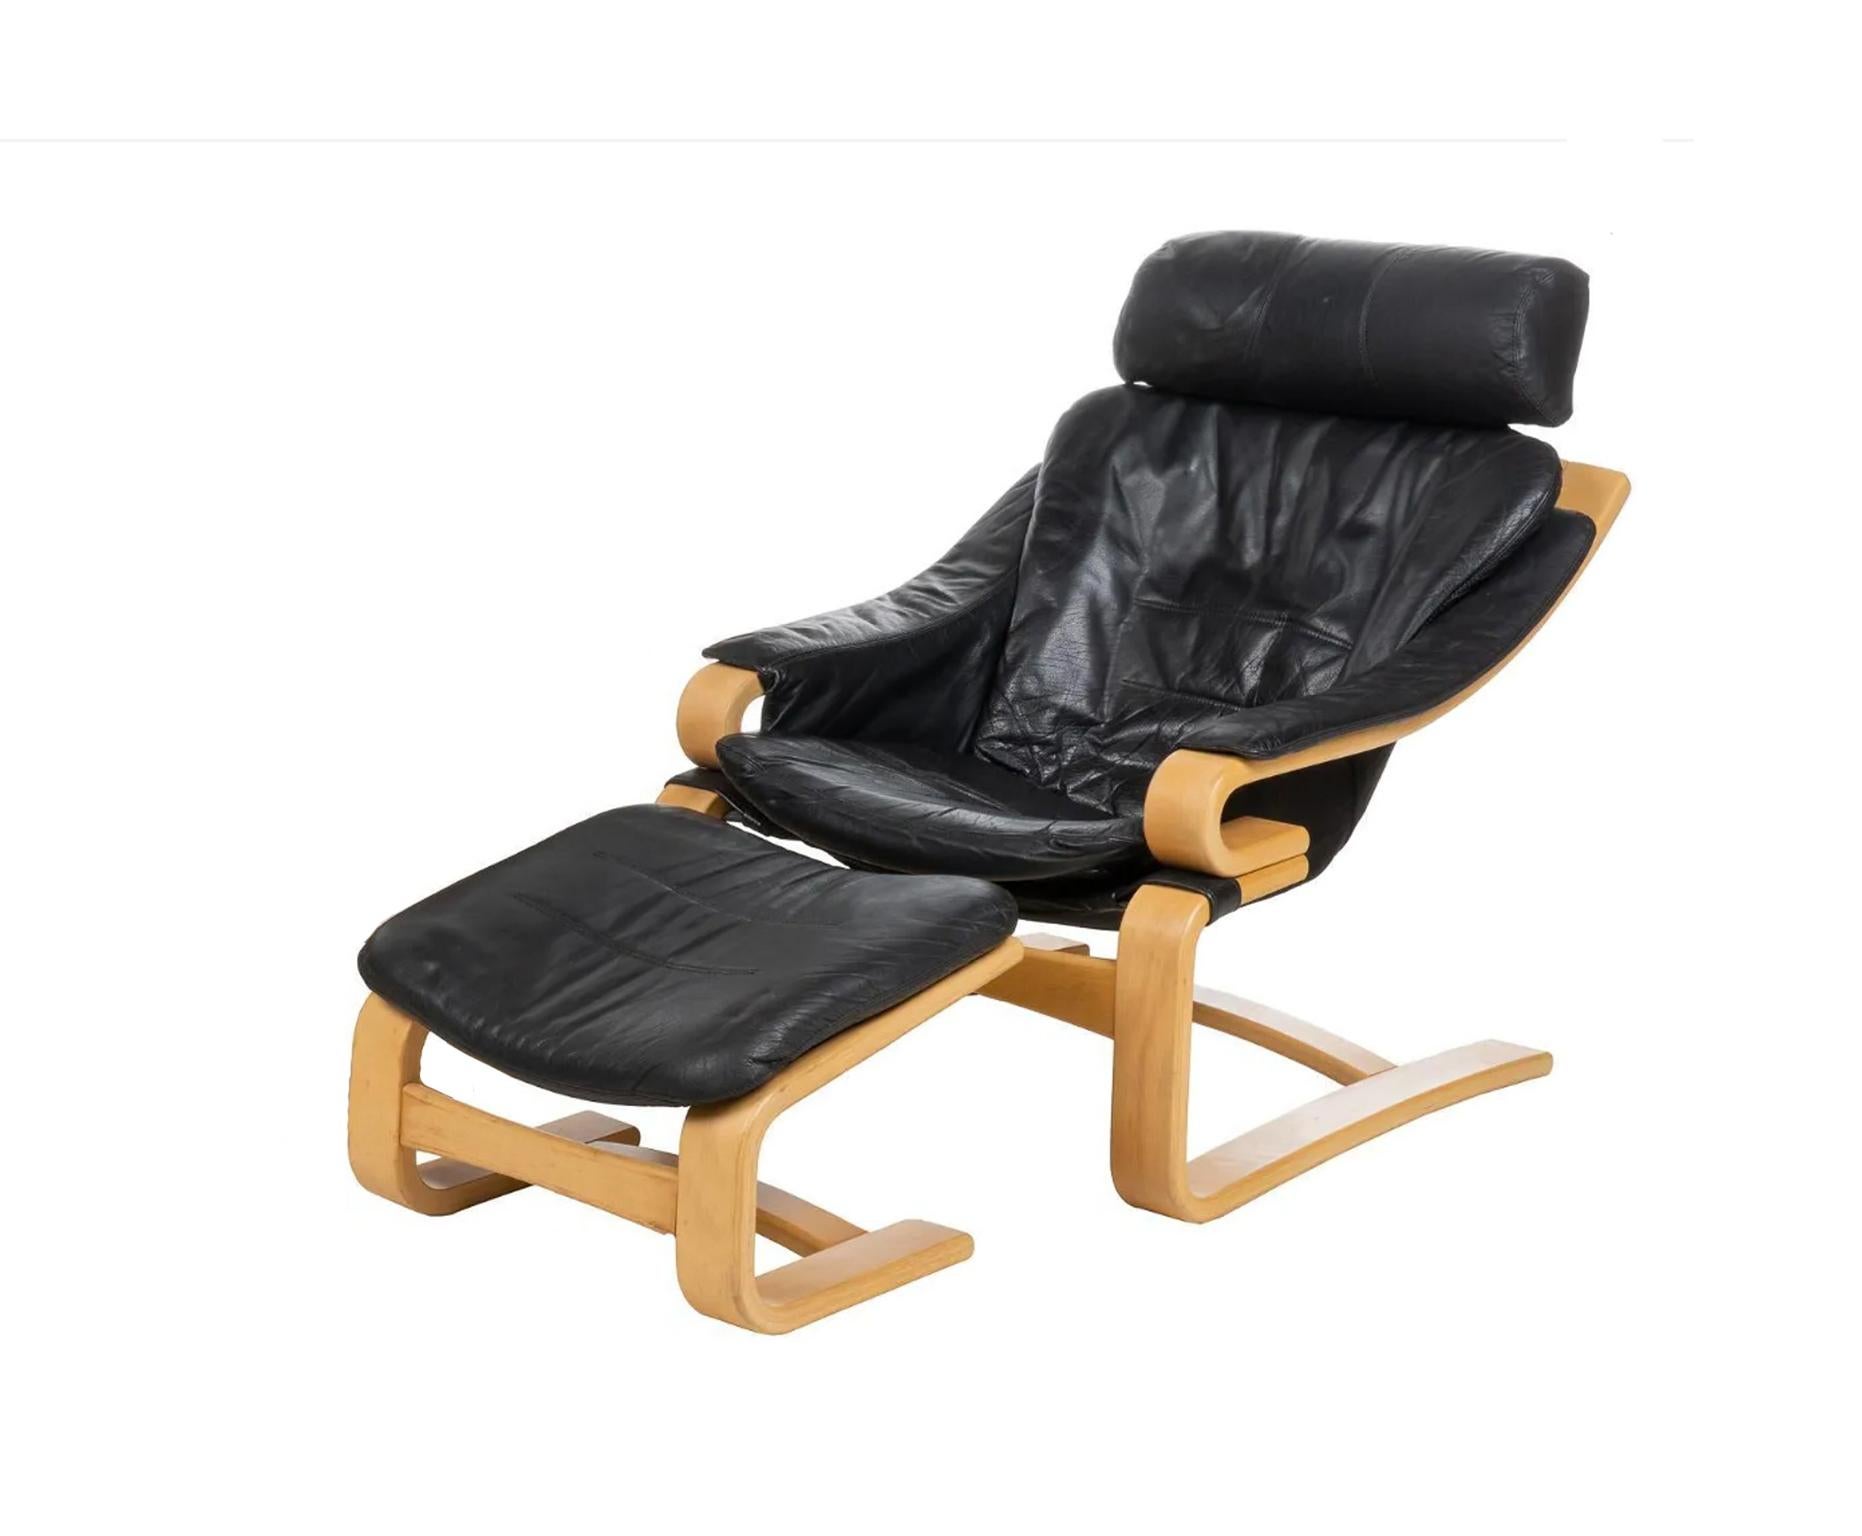 Danish Mid-Century Modern Apollo lounge chair with Ottoman by Svend Skipper for Skippers Mobler. Has soft black leather upholstery supported on Blonde Birch bentwood frames ending in sled legs. Labeled and marked skipper Mobler. The chair comes with